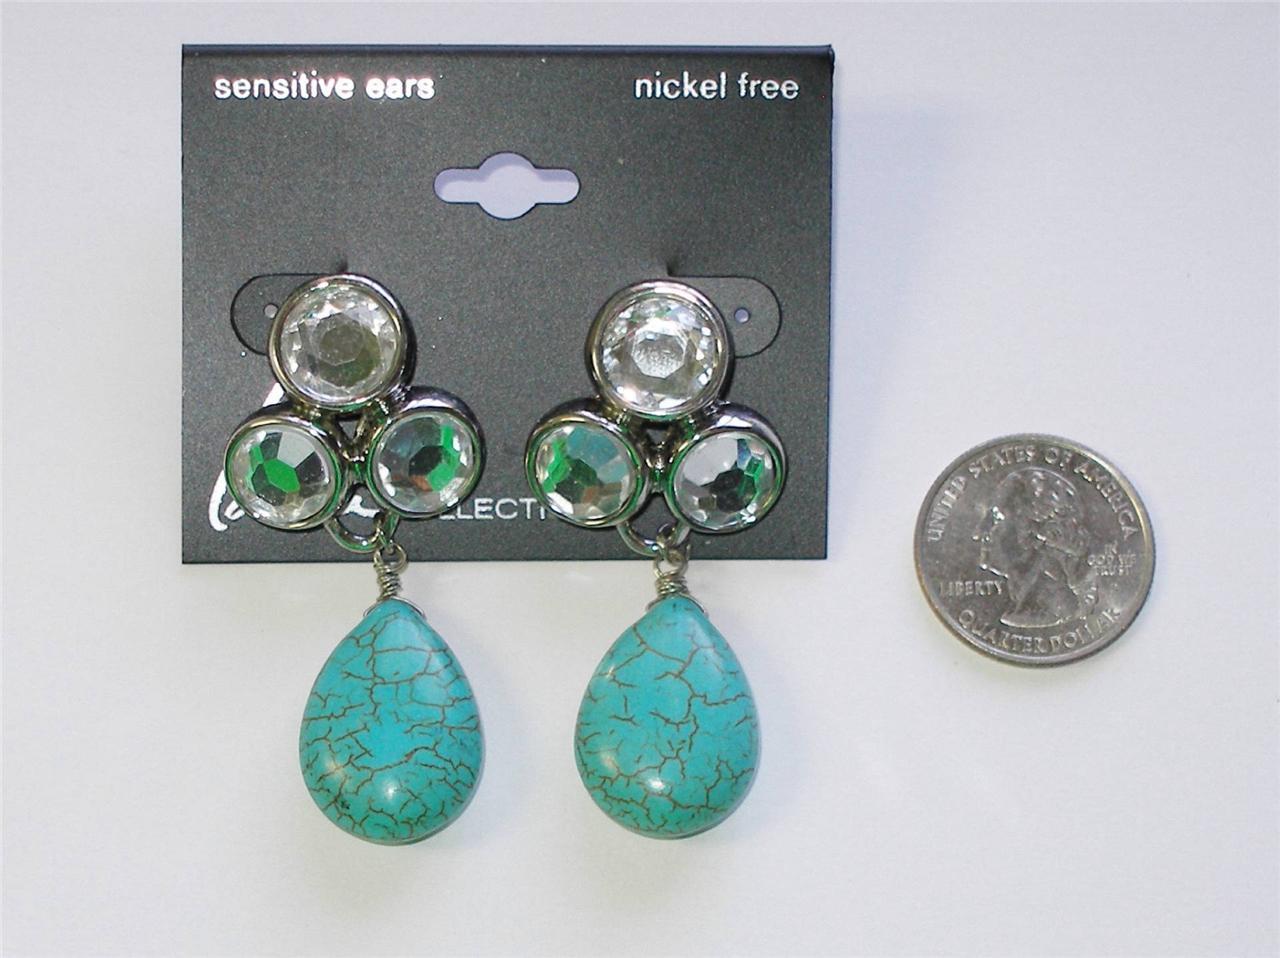 Primary image for Lane Bryant Post Earrings Faux Turquoise and Crystals for Sensitive Ears